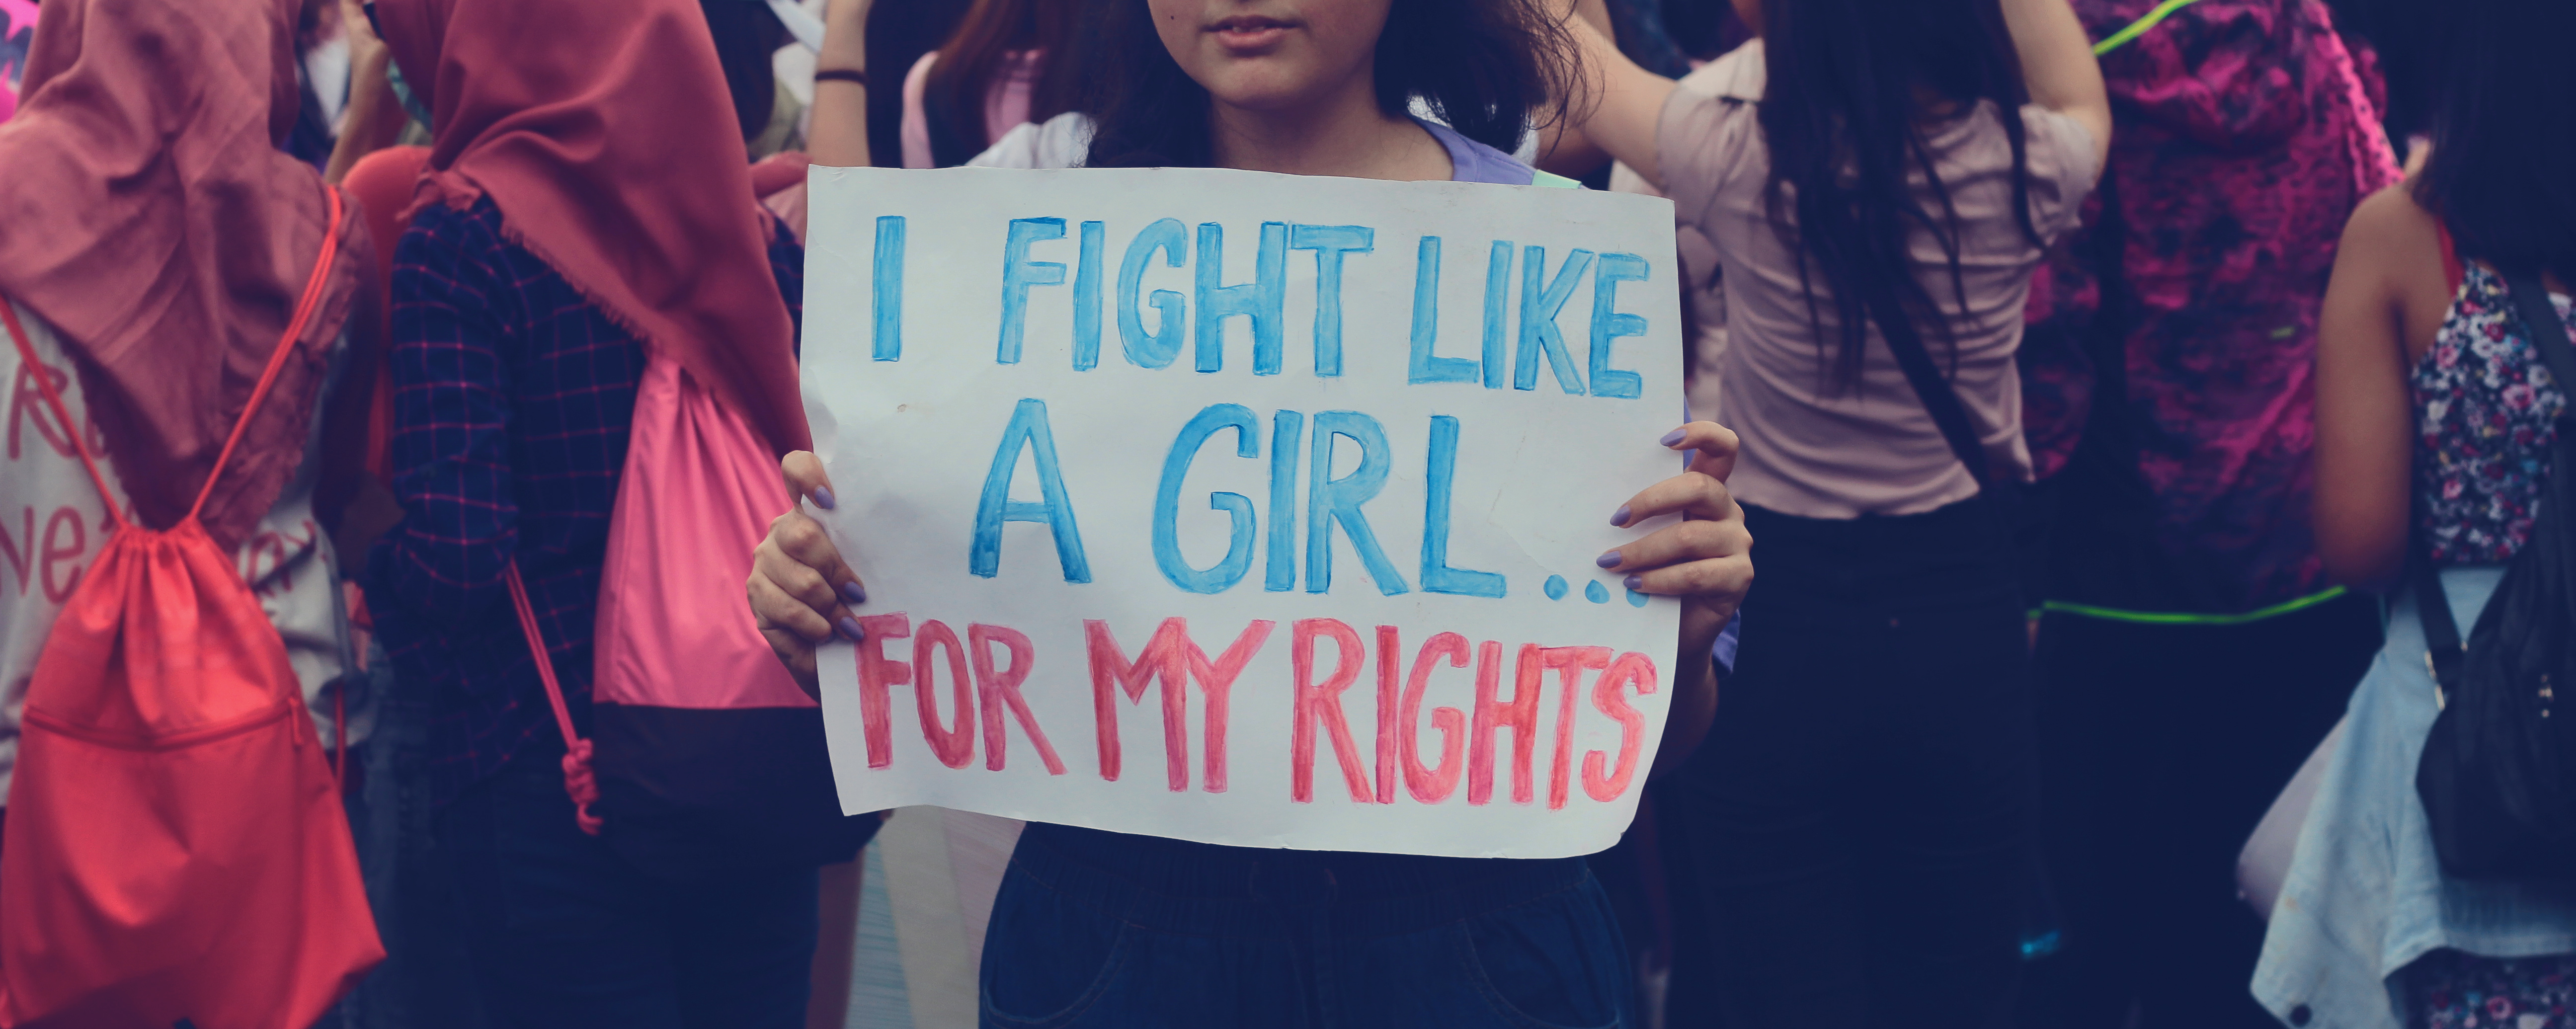 Young woman holds sign at protest which reads: I fight like a girl for my rights